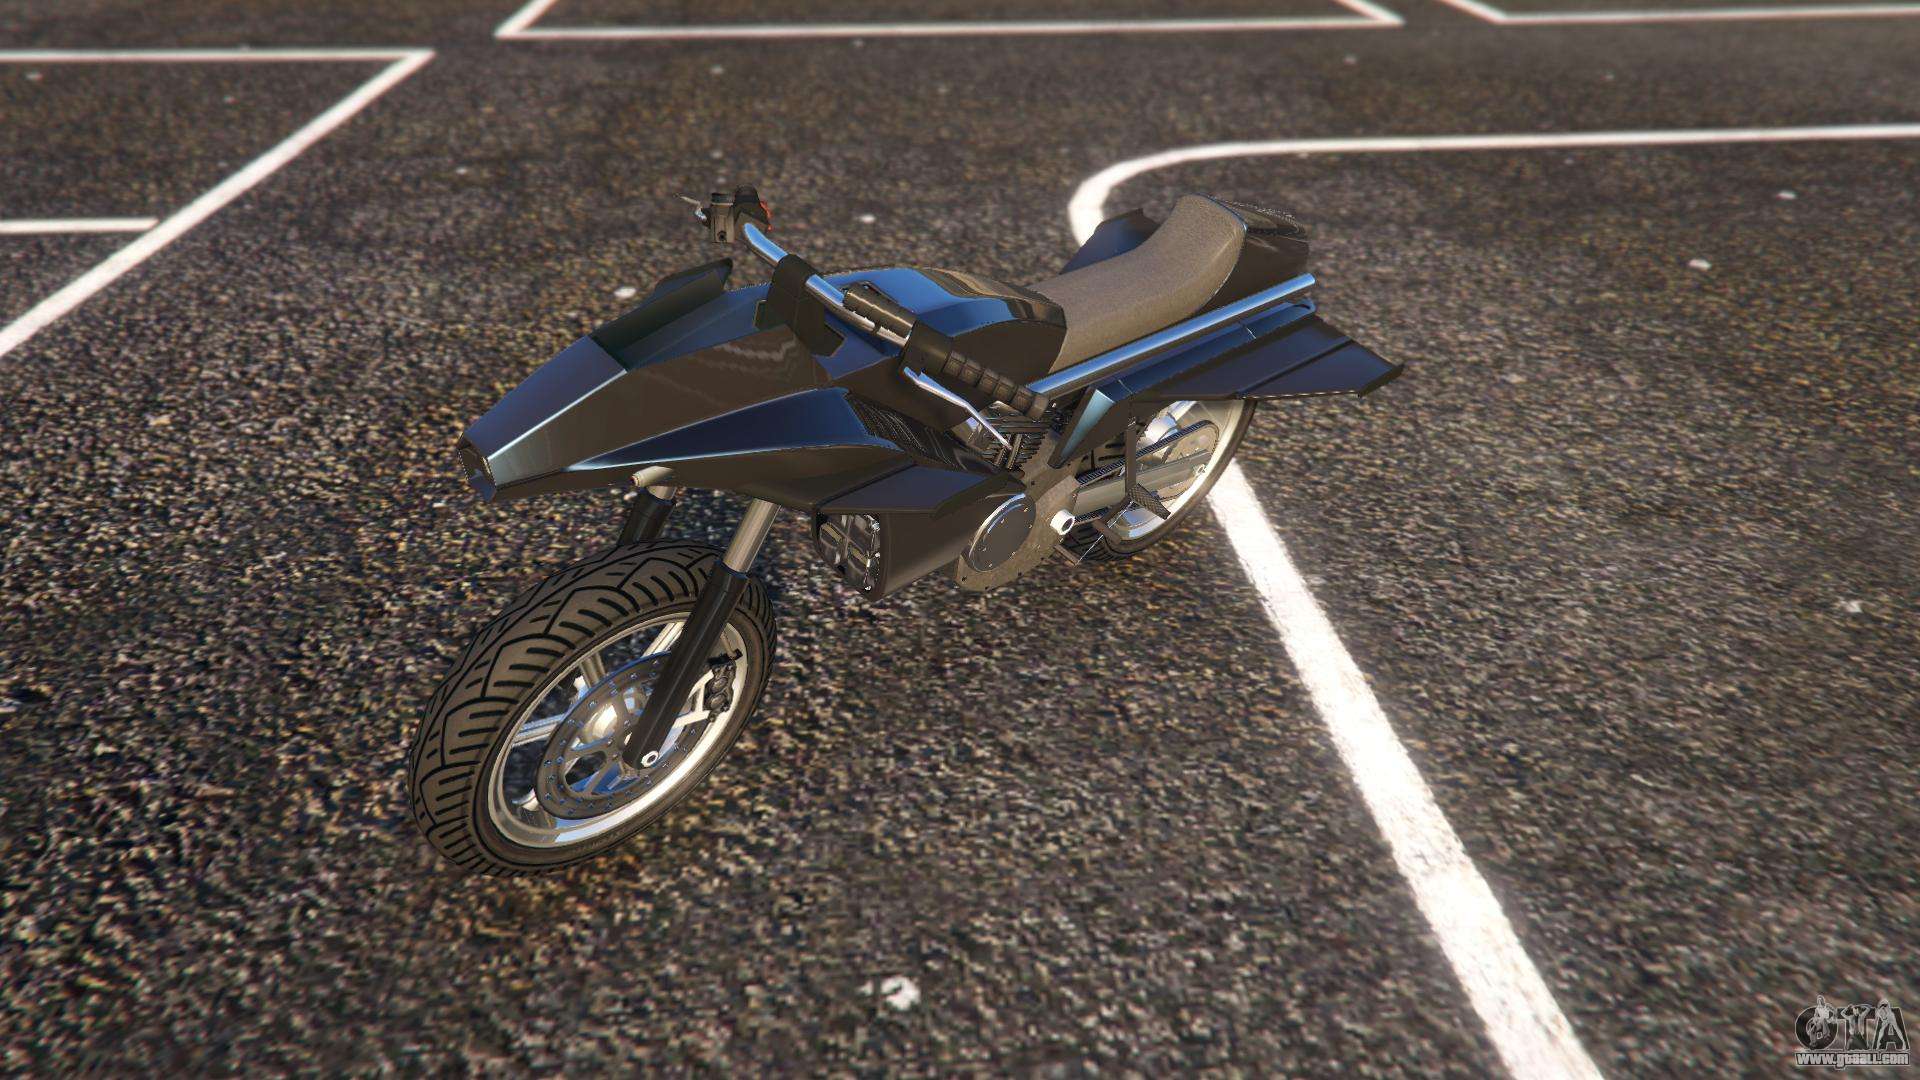 Pegassi Oppressor from the GTA 5 front view